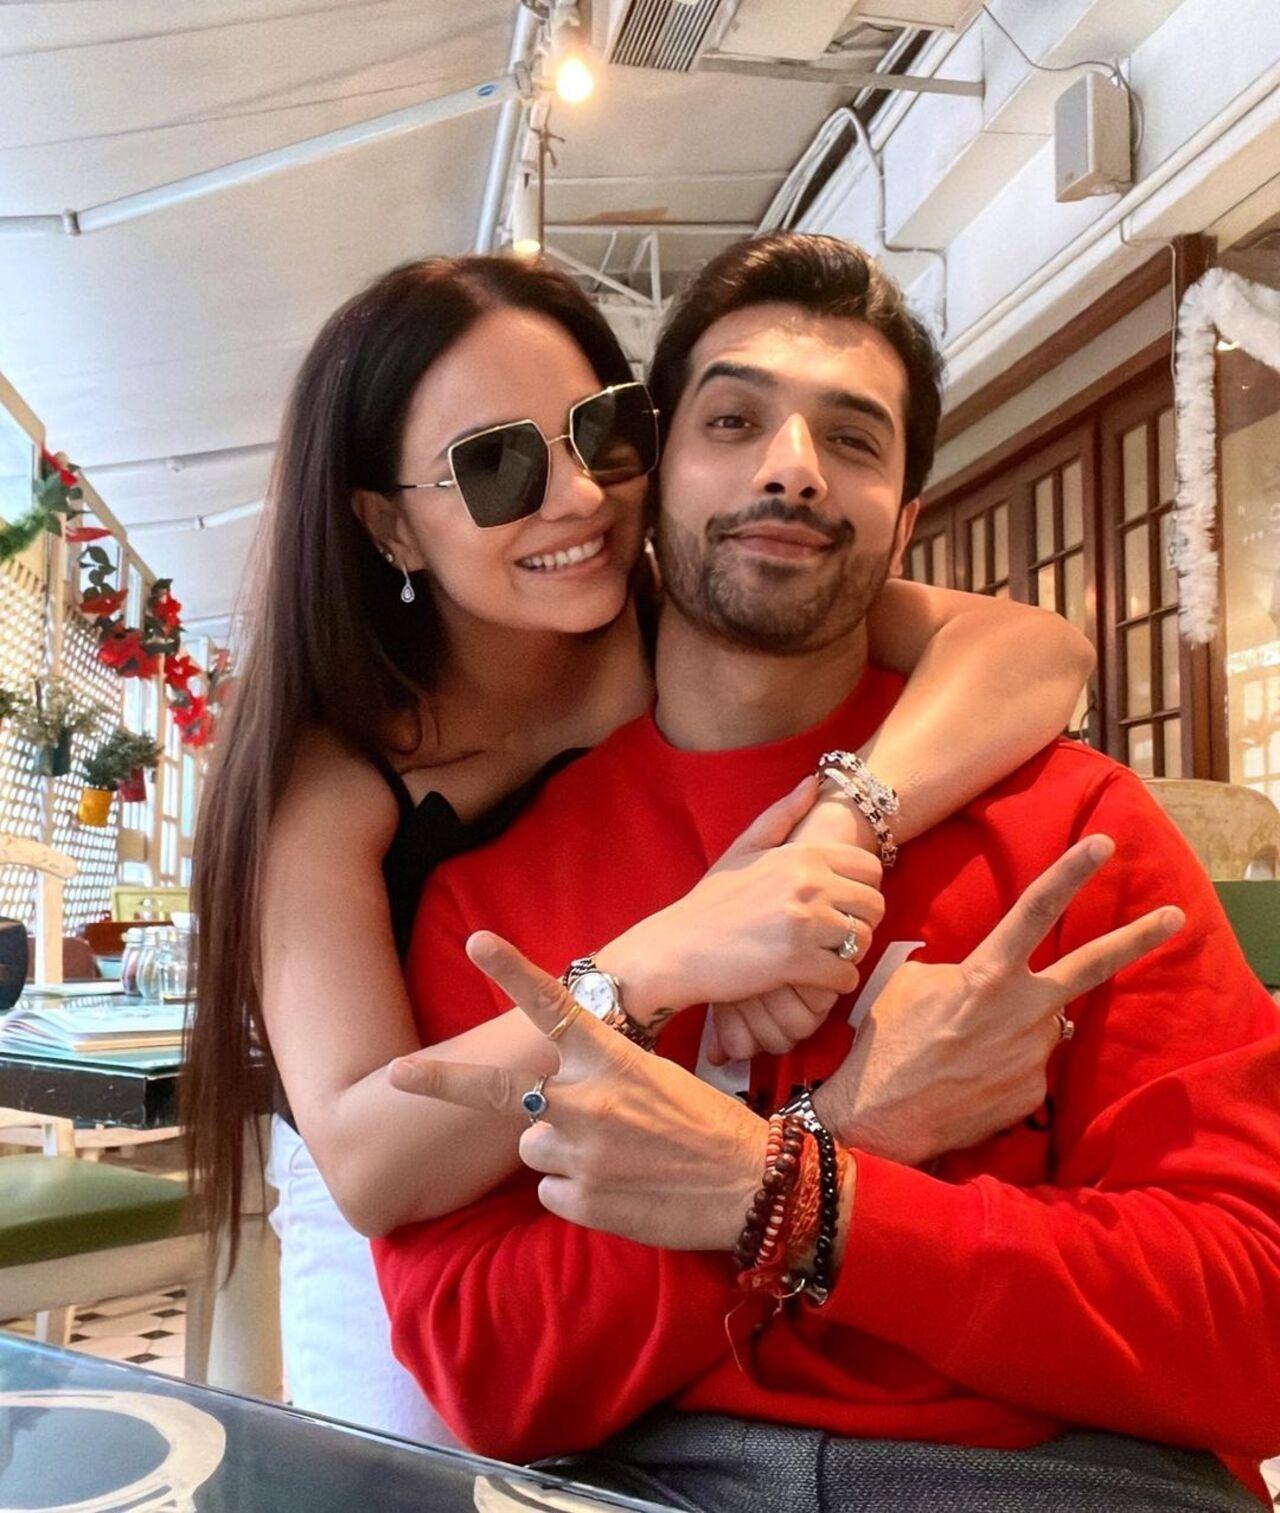 Sharad Malhotra and Ripci Bhatia got married on April 20, 2019, in a private ceremony attended by their close friends and family